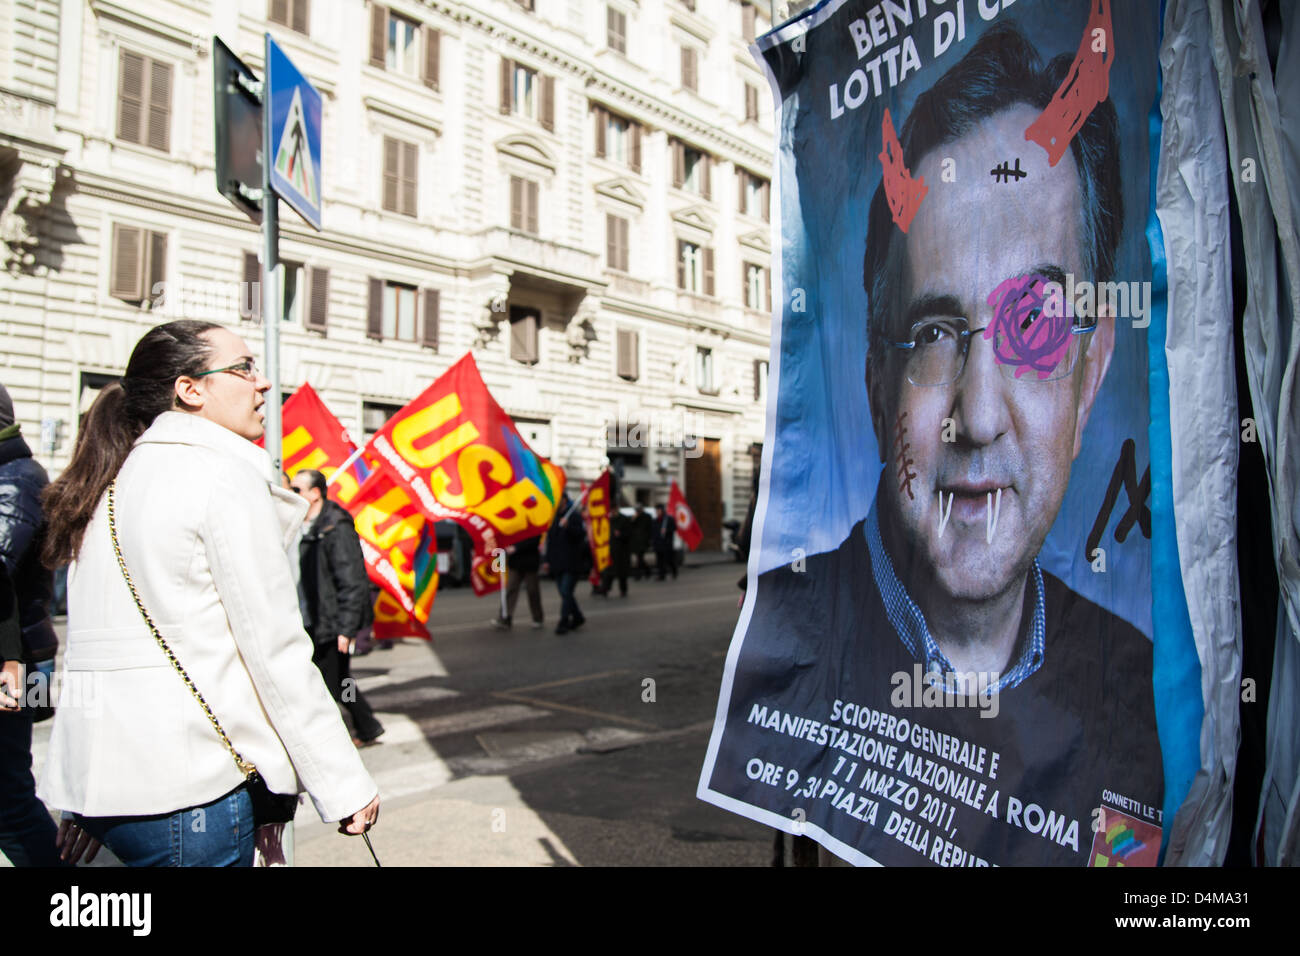 A woman looks at a banner of CEO of FIAT corp. Sergio Marchionne, during a general strike demonstration Stock Photo